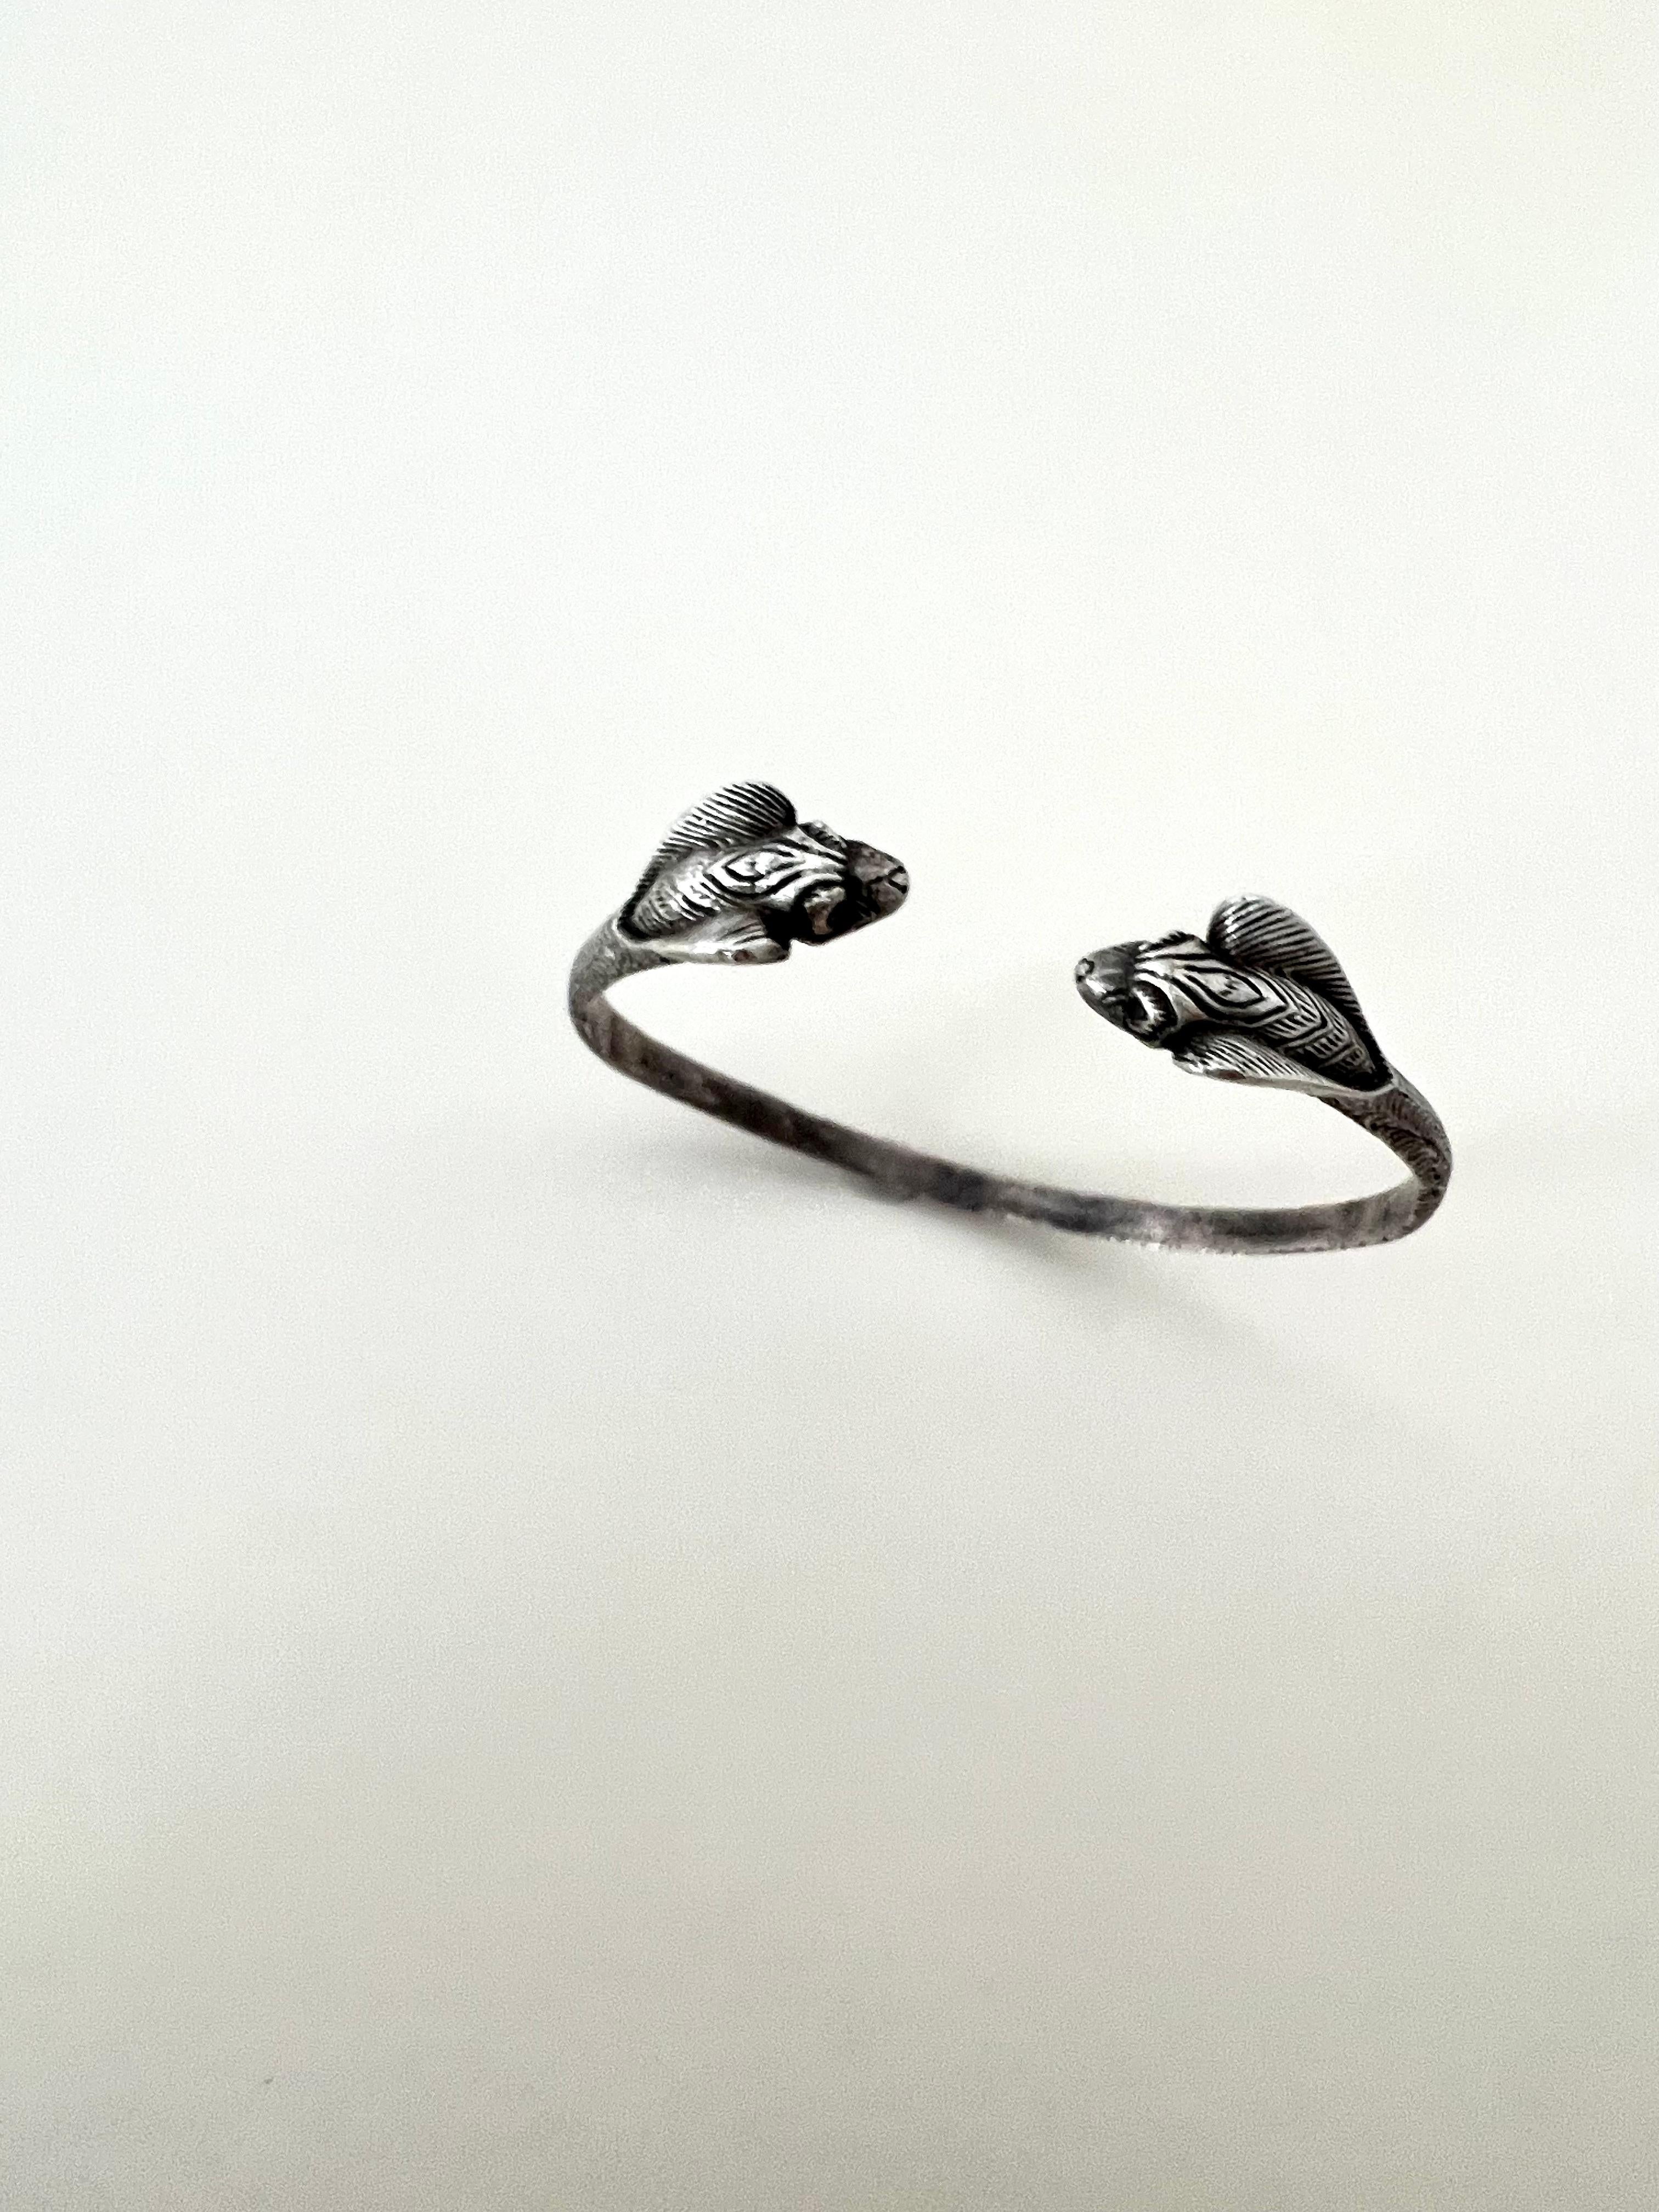 Hand-Crafted Sterling Bracelet with Cobra Heads For Sale